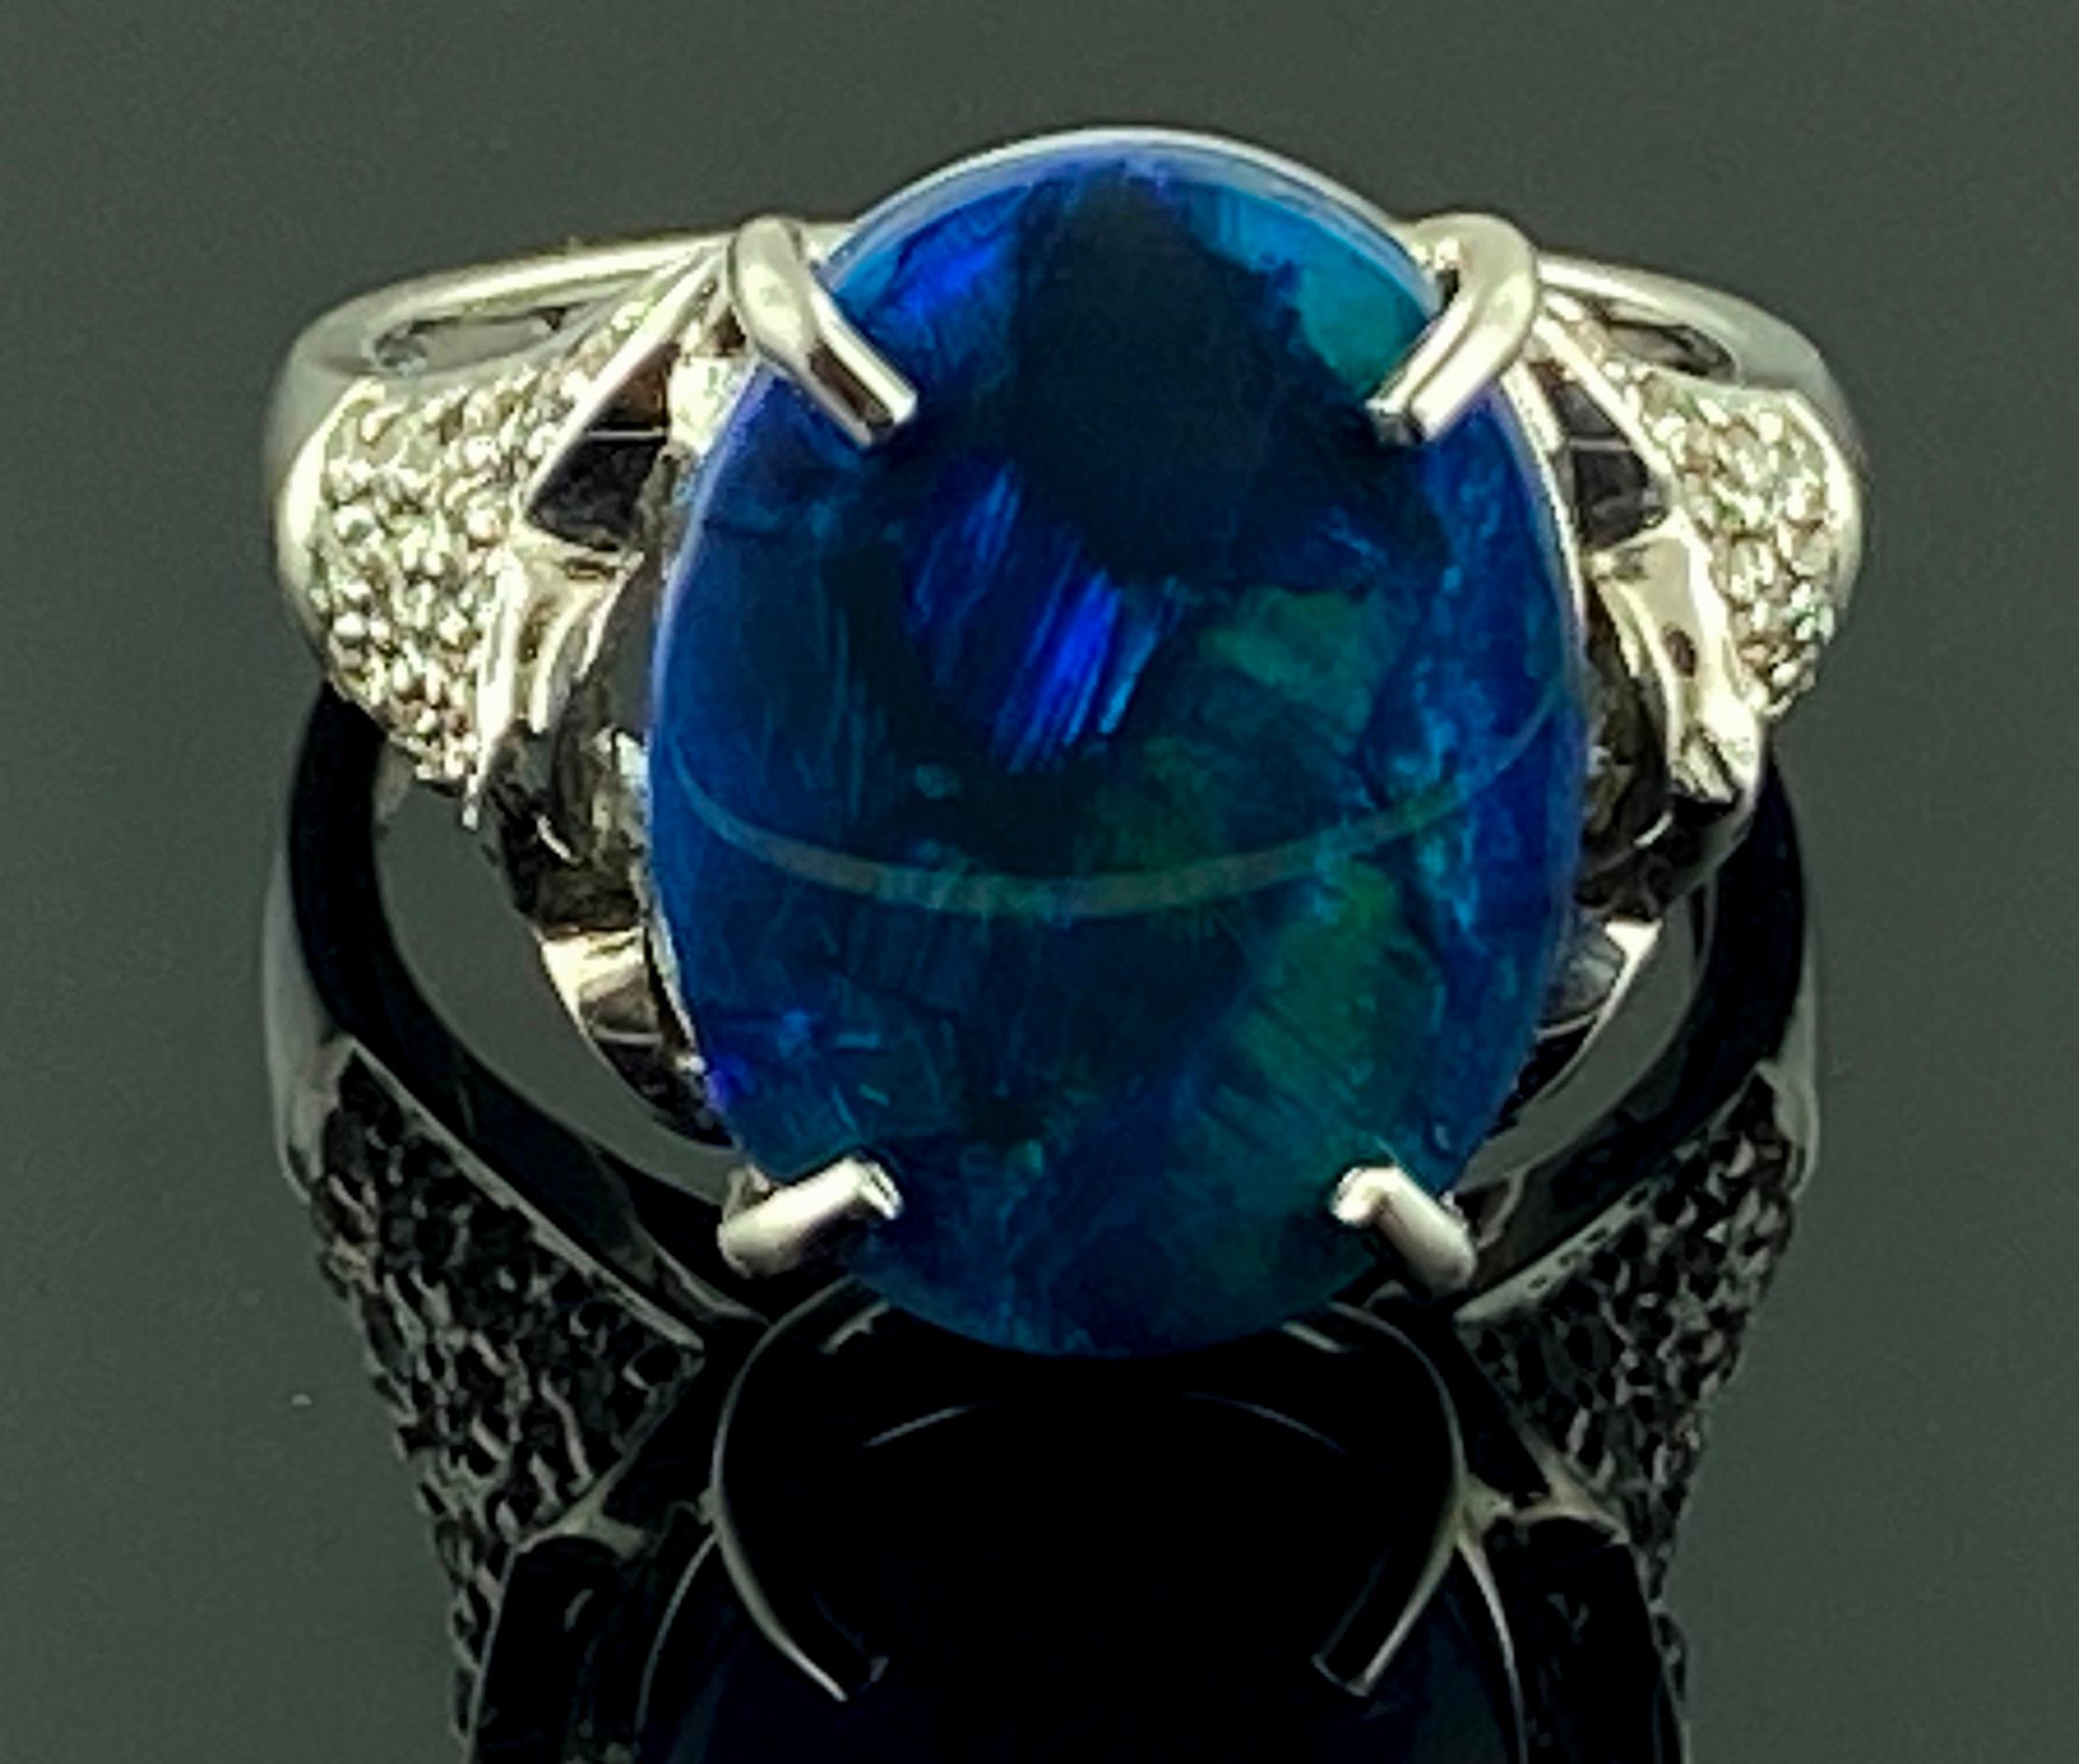 Set in 14 karat white gold is a 4.22 carat oval shaped Black Opal in the center.  The mounting has 42 round brilliant cut diamonds with a total diamond weight of 0.40 carats.  Gold weight is 6.6 grams.  Ring size is 7.5